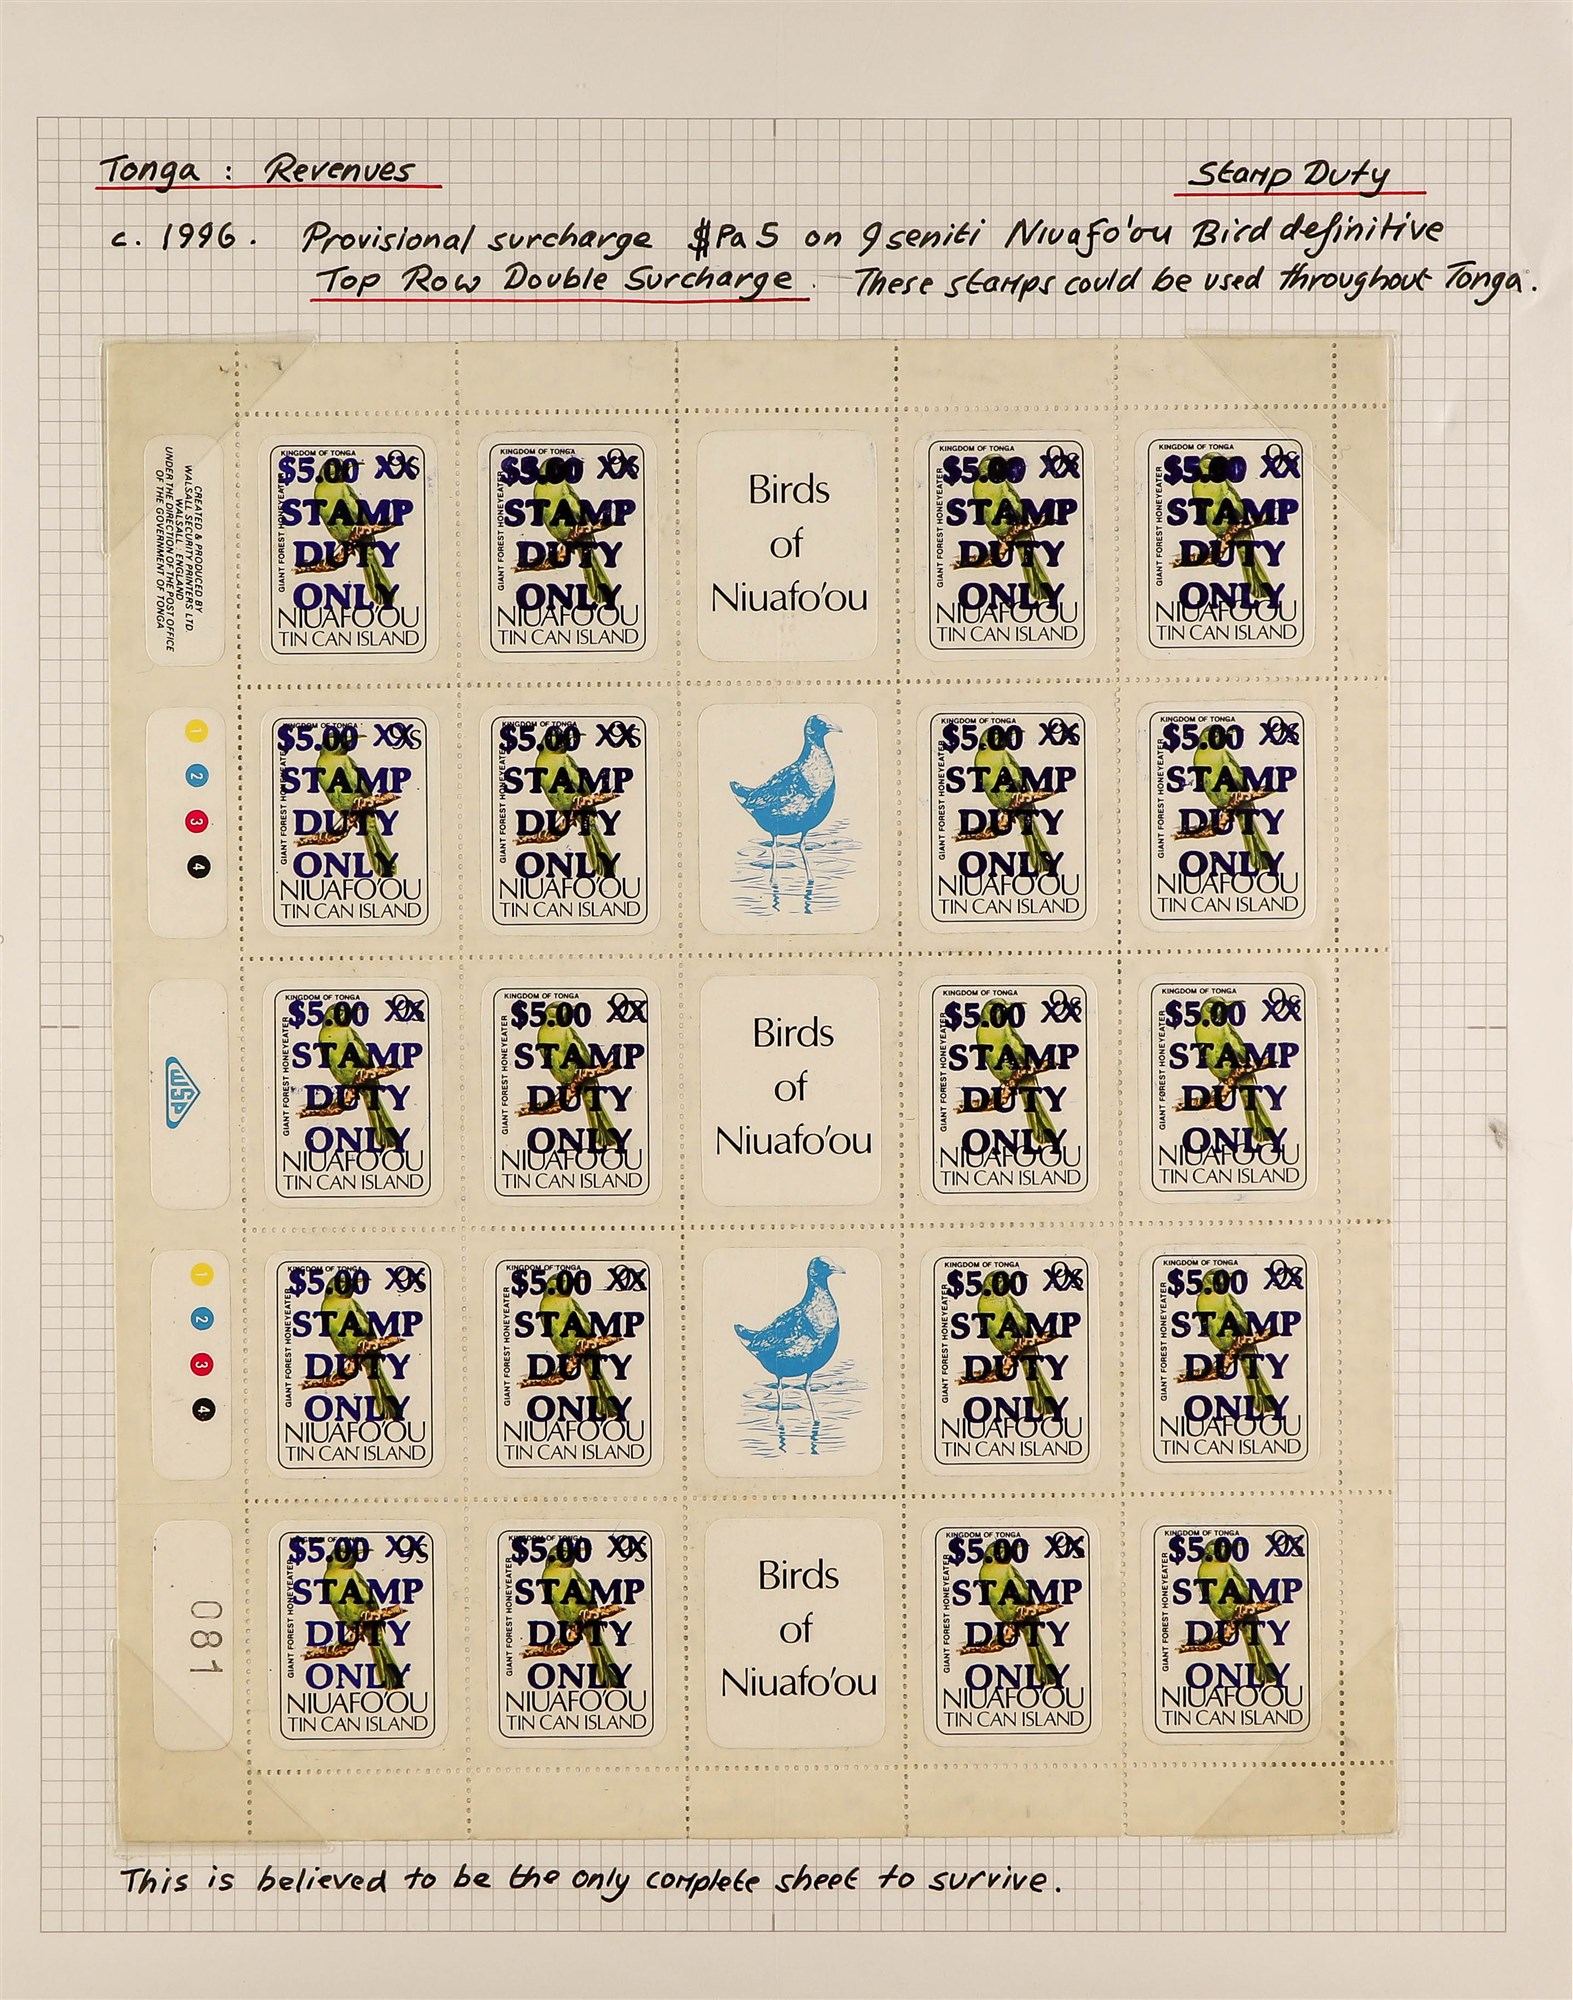 TONGA REVENUES - STAMP DUTY 1996 $5 on 9s Honeyeater Bird, Barefoot 61, never hinged mint complete